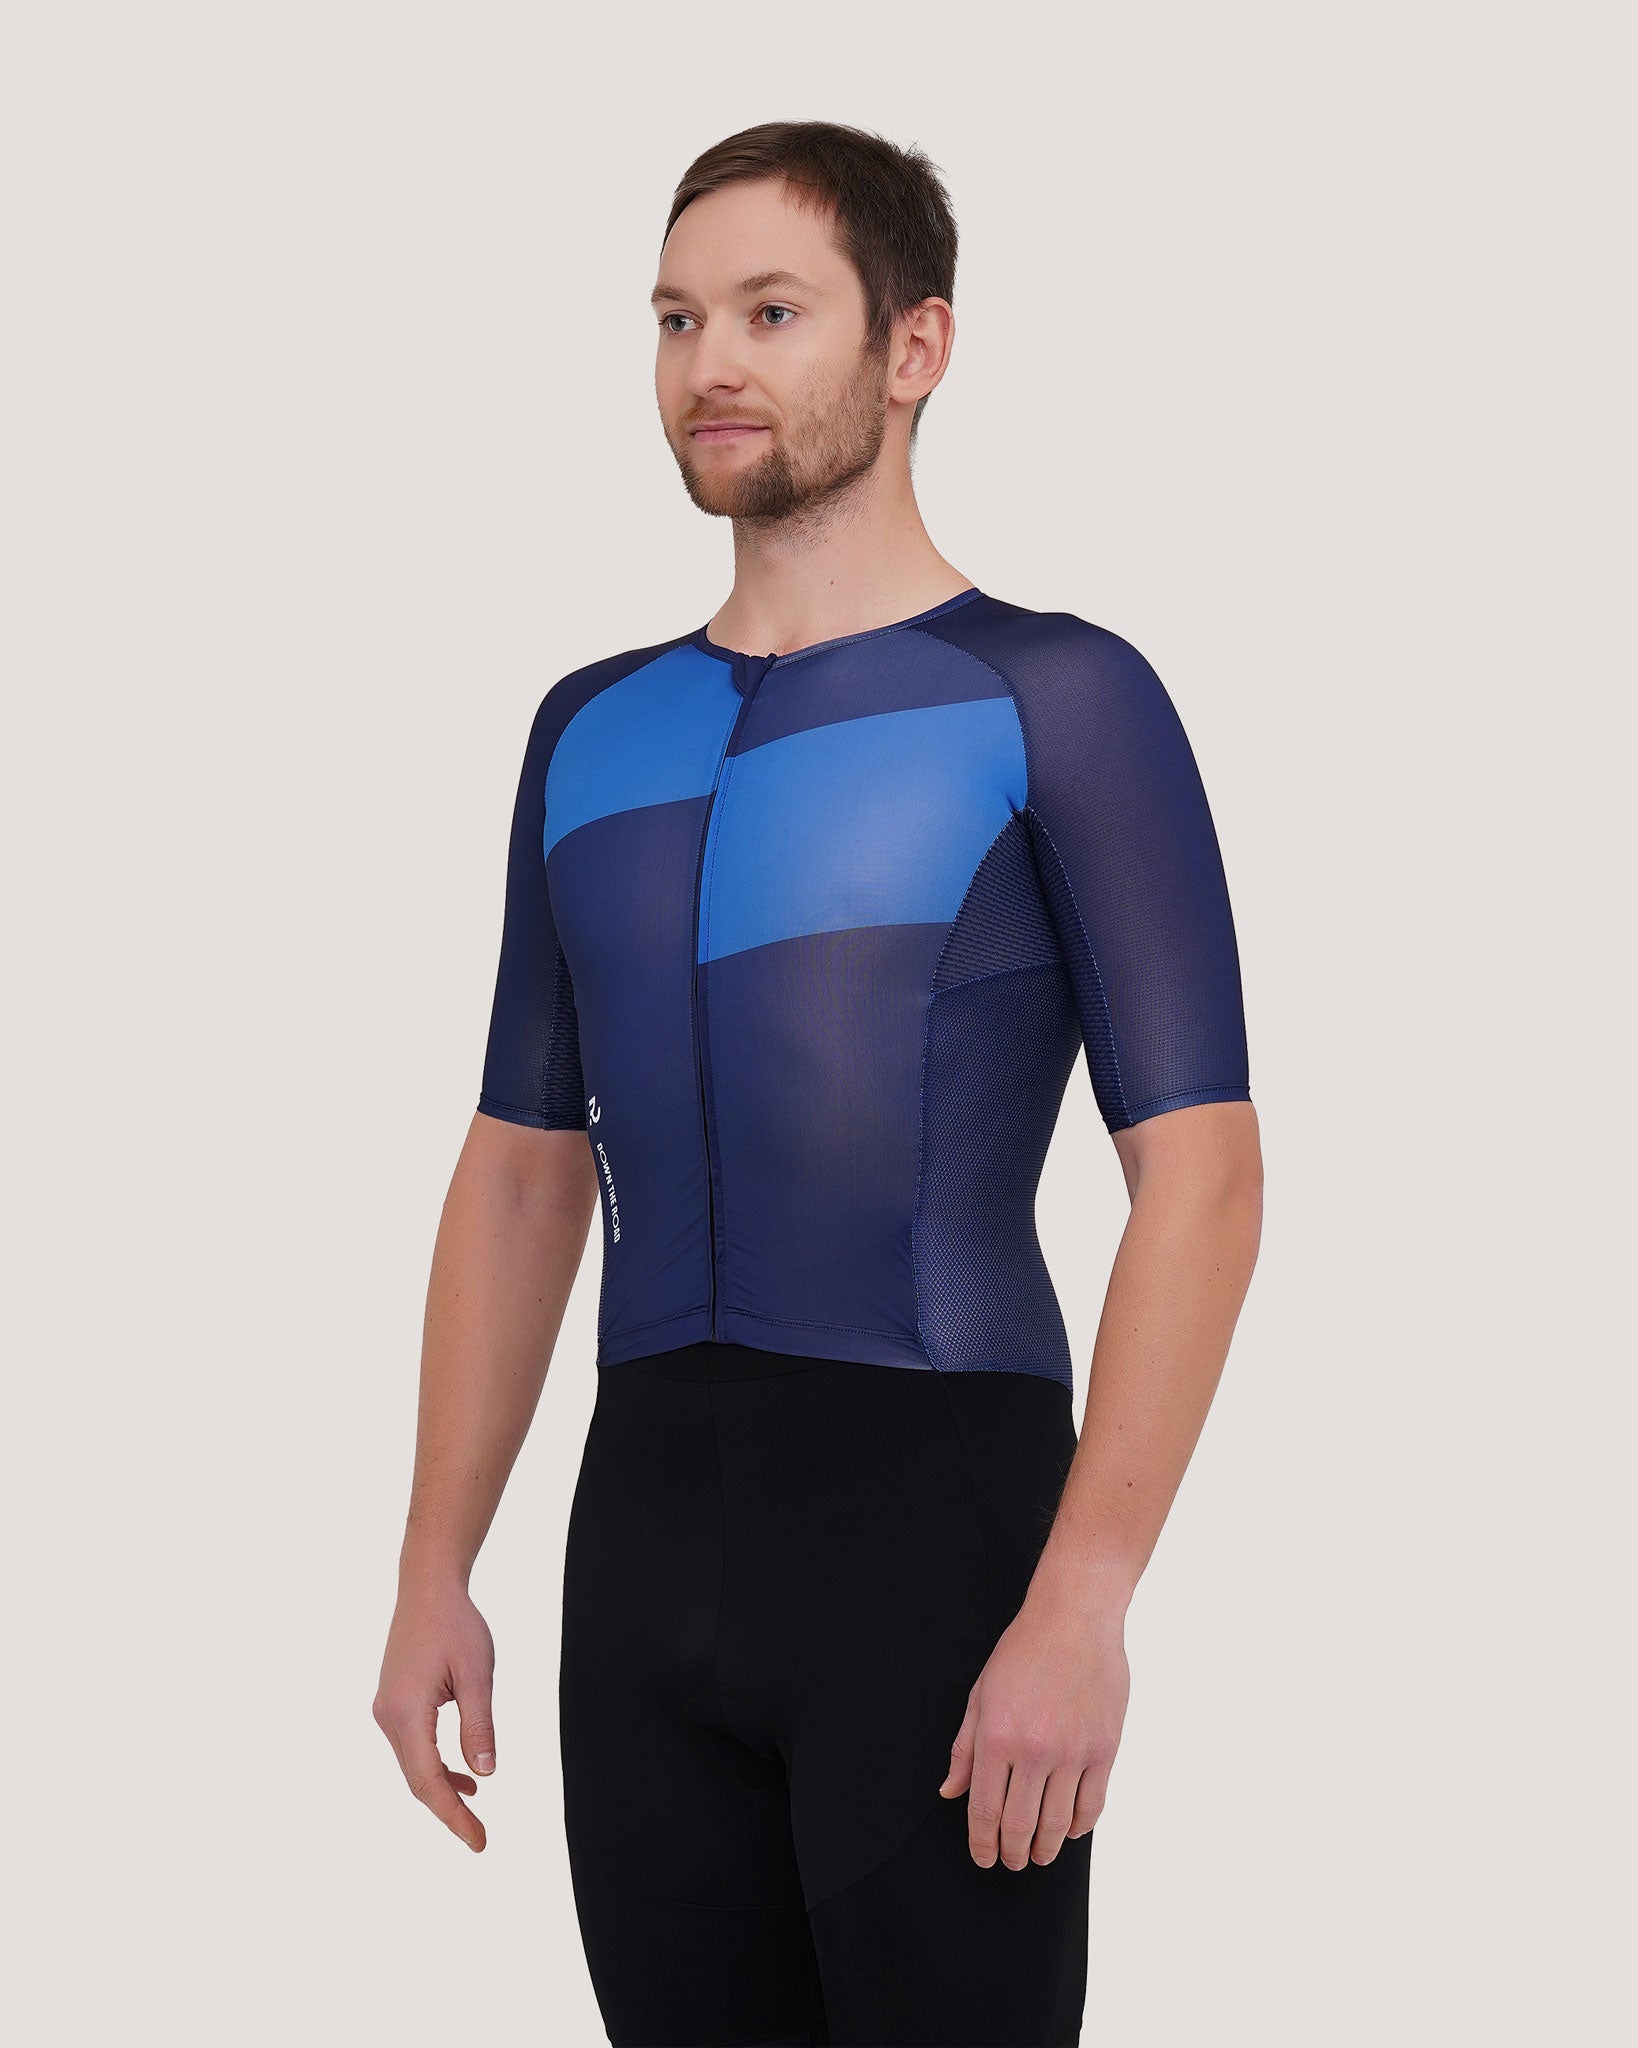 blue trisuit with aero sleeves